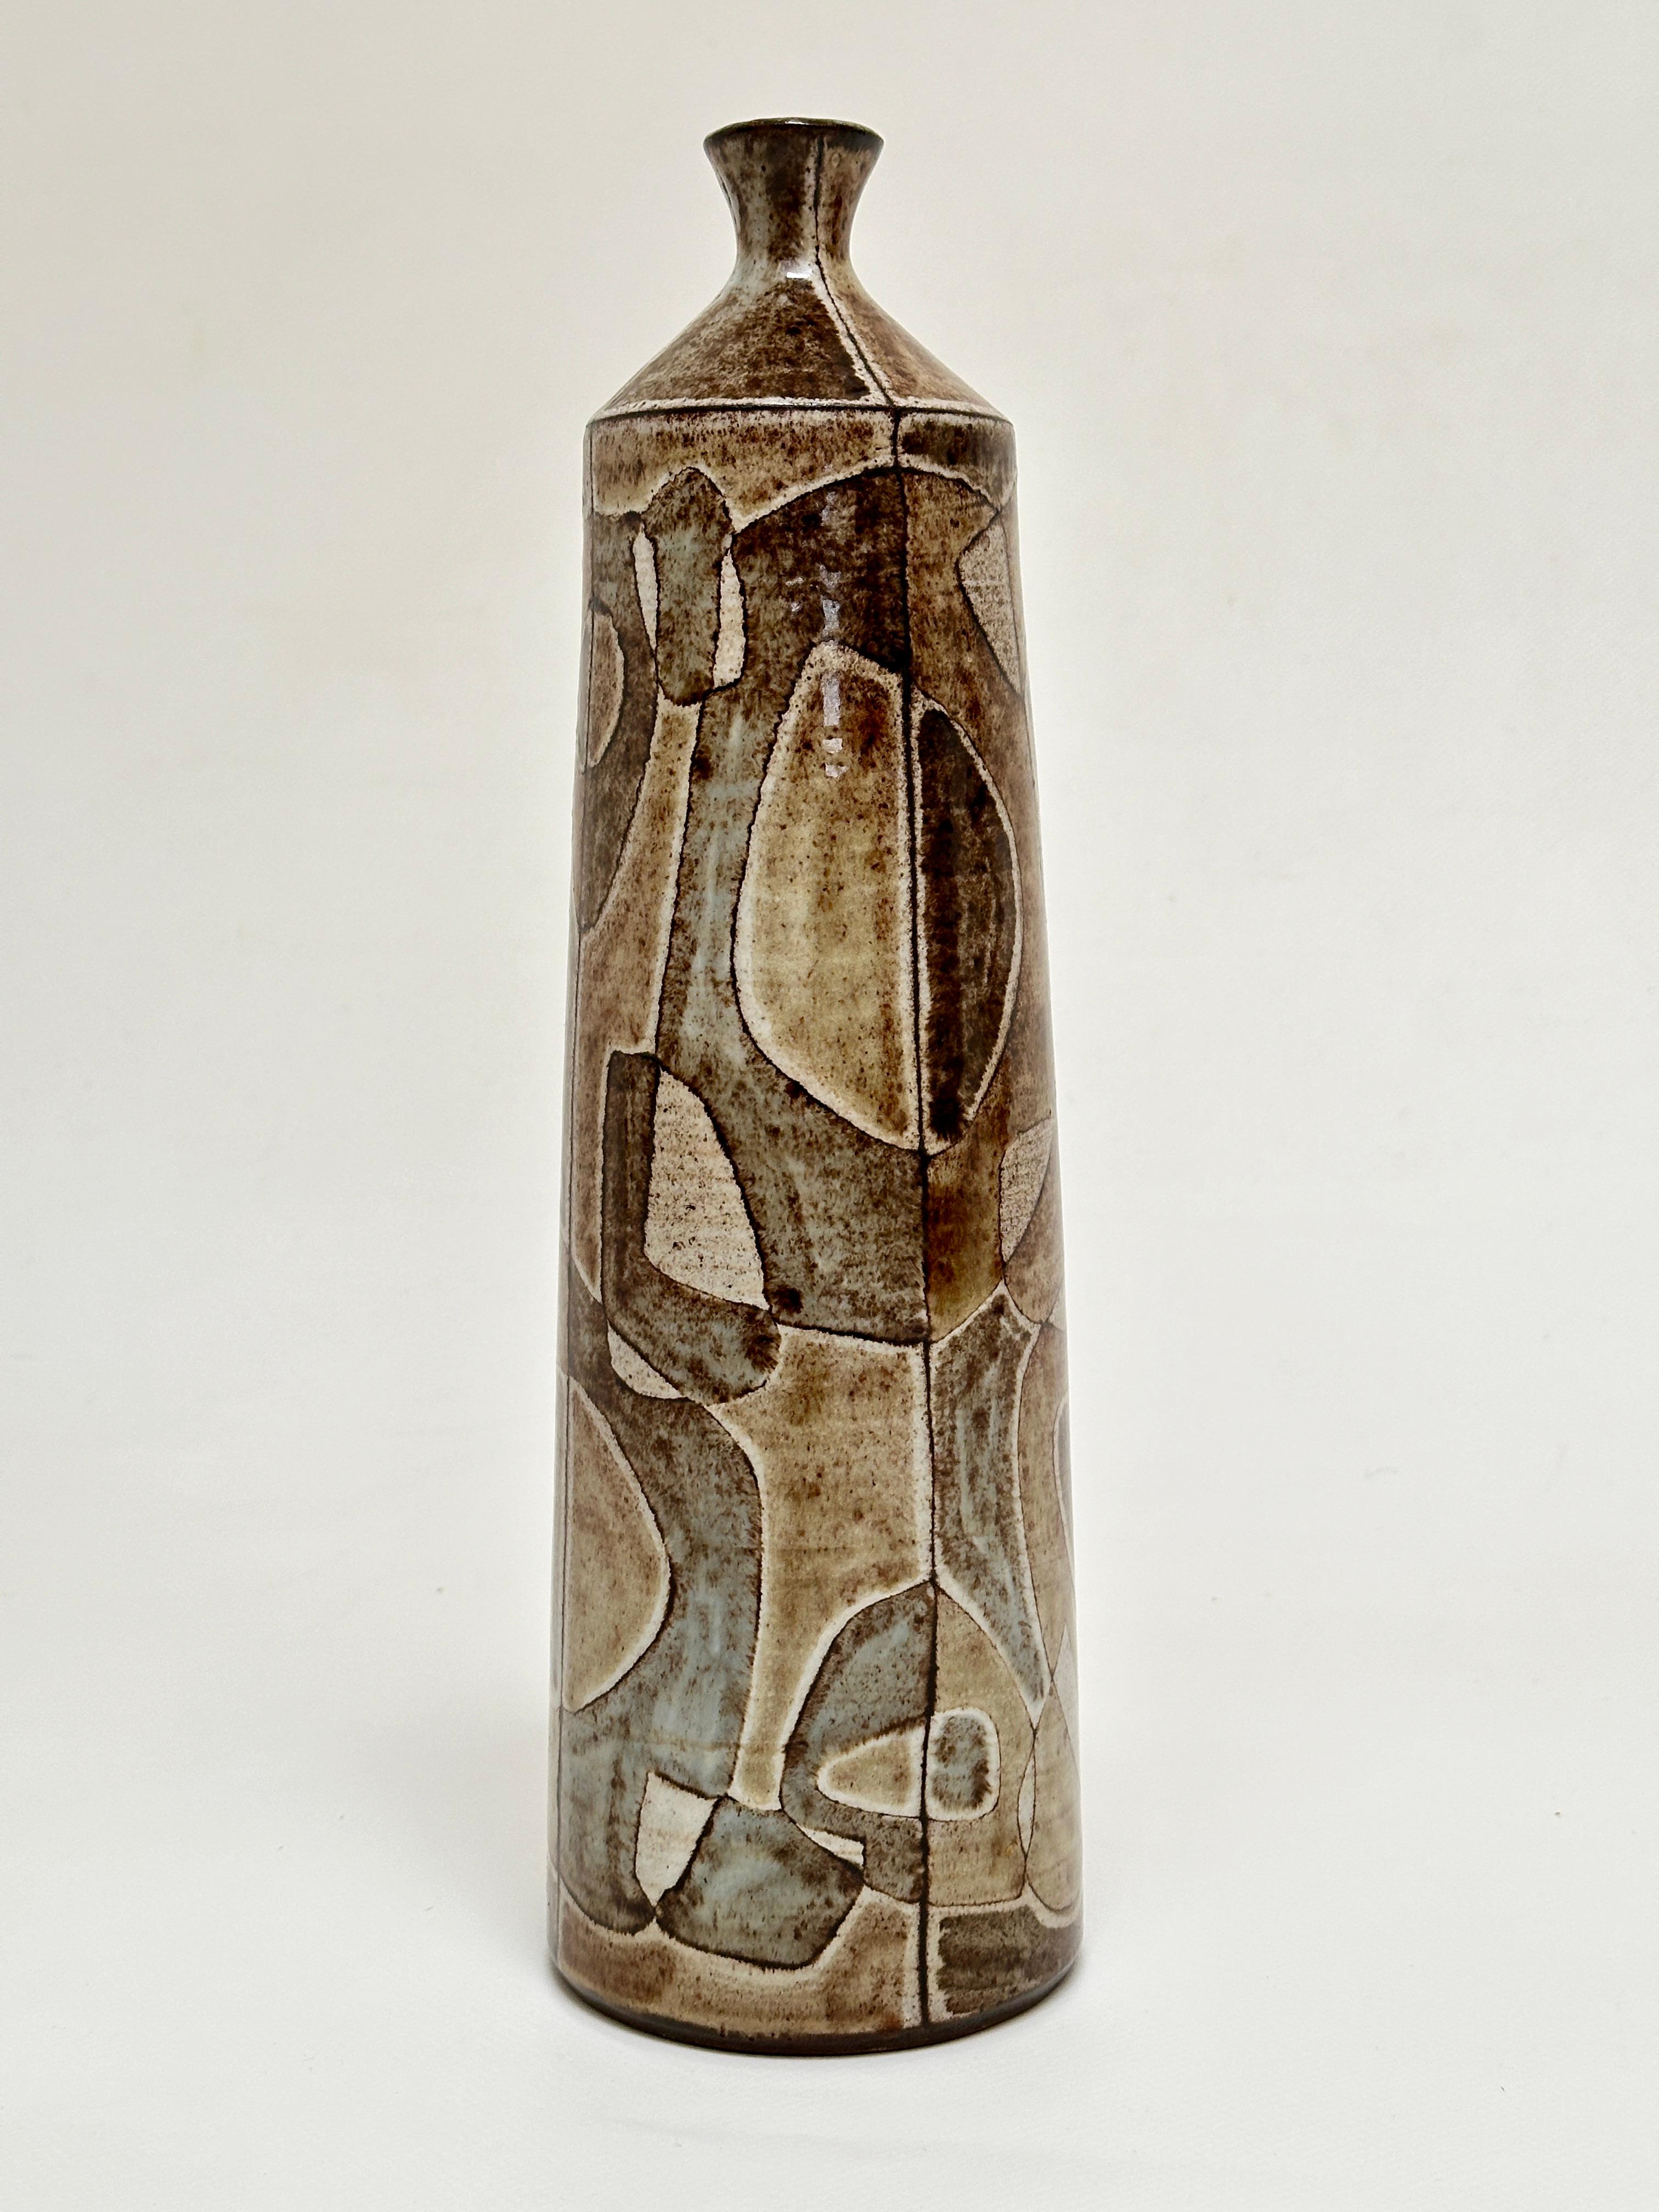 Elegant bottle vase in red earth from Vallauris, enamels with muted tones and abstract patterns revealing the earth through a transparent effect.

About the Artist 
Graduated from the Reims School of Fine Arts in the architecture section in 1949, he